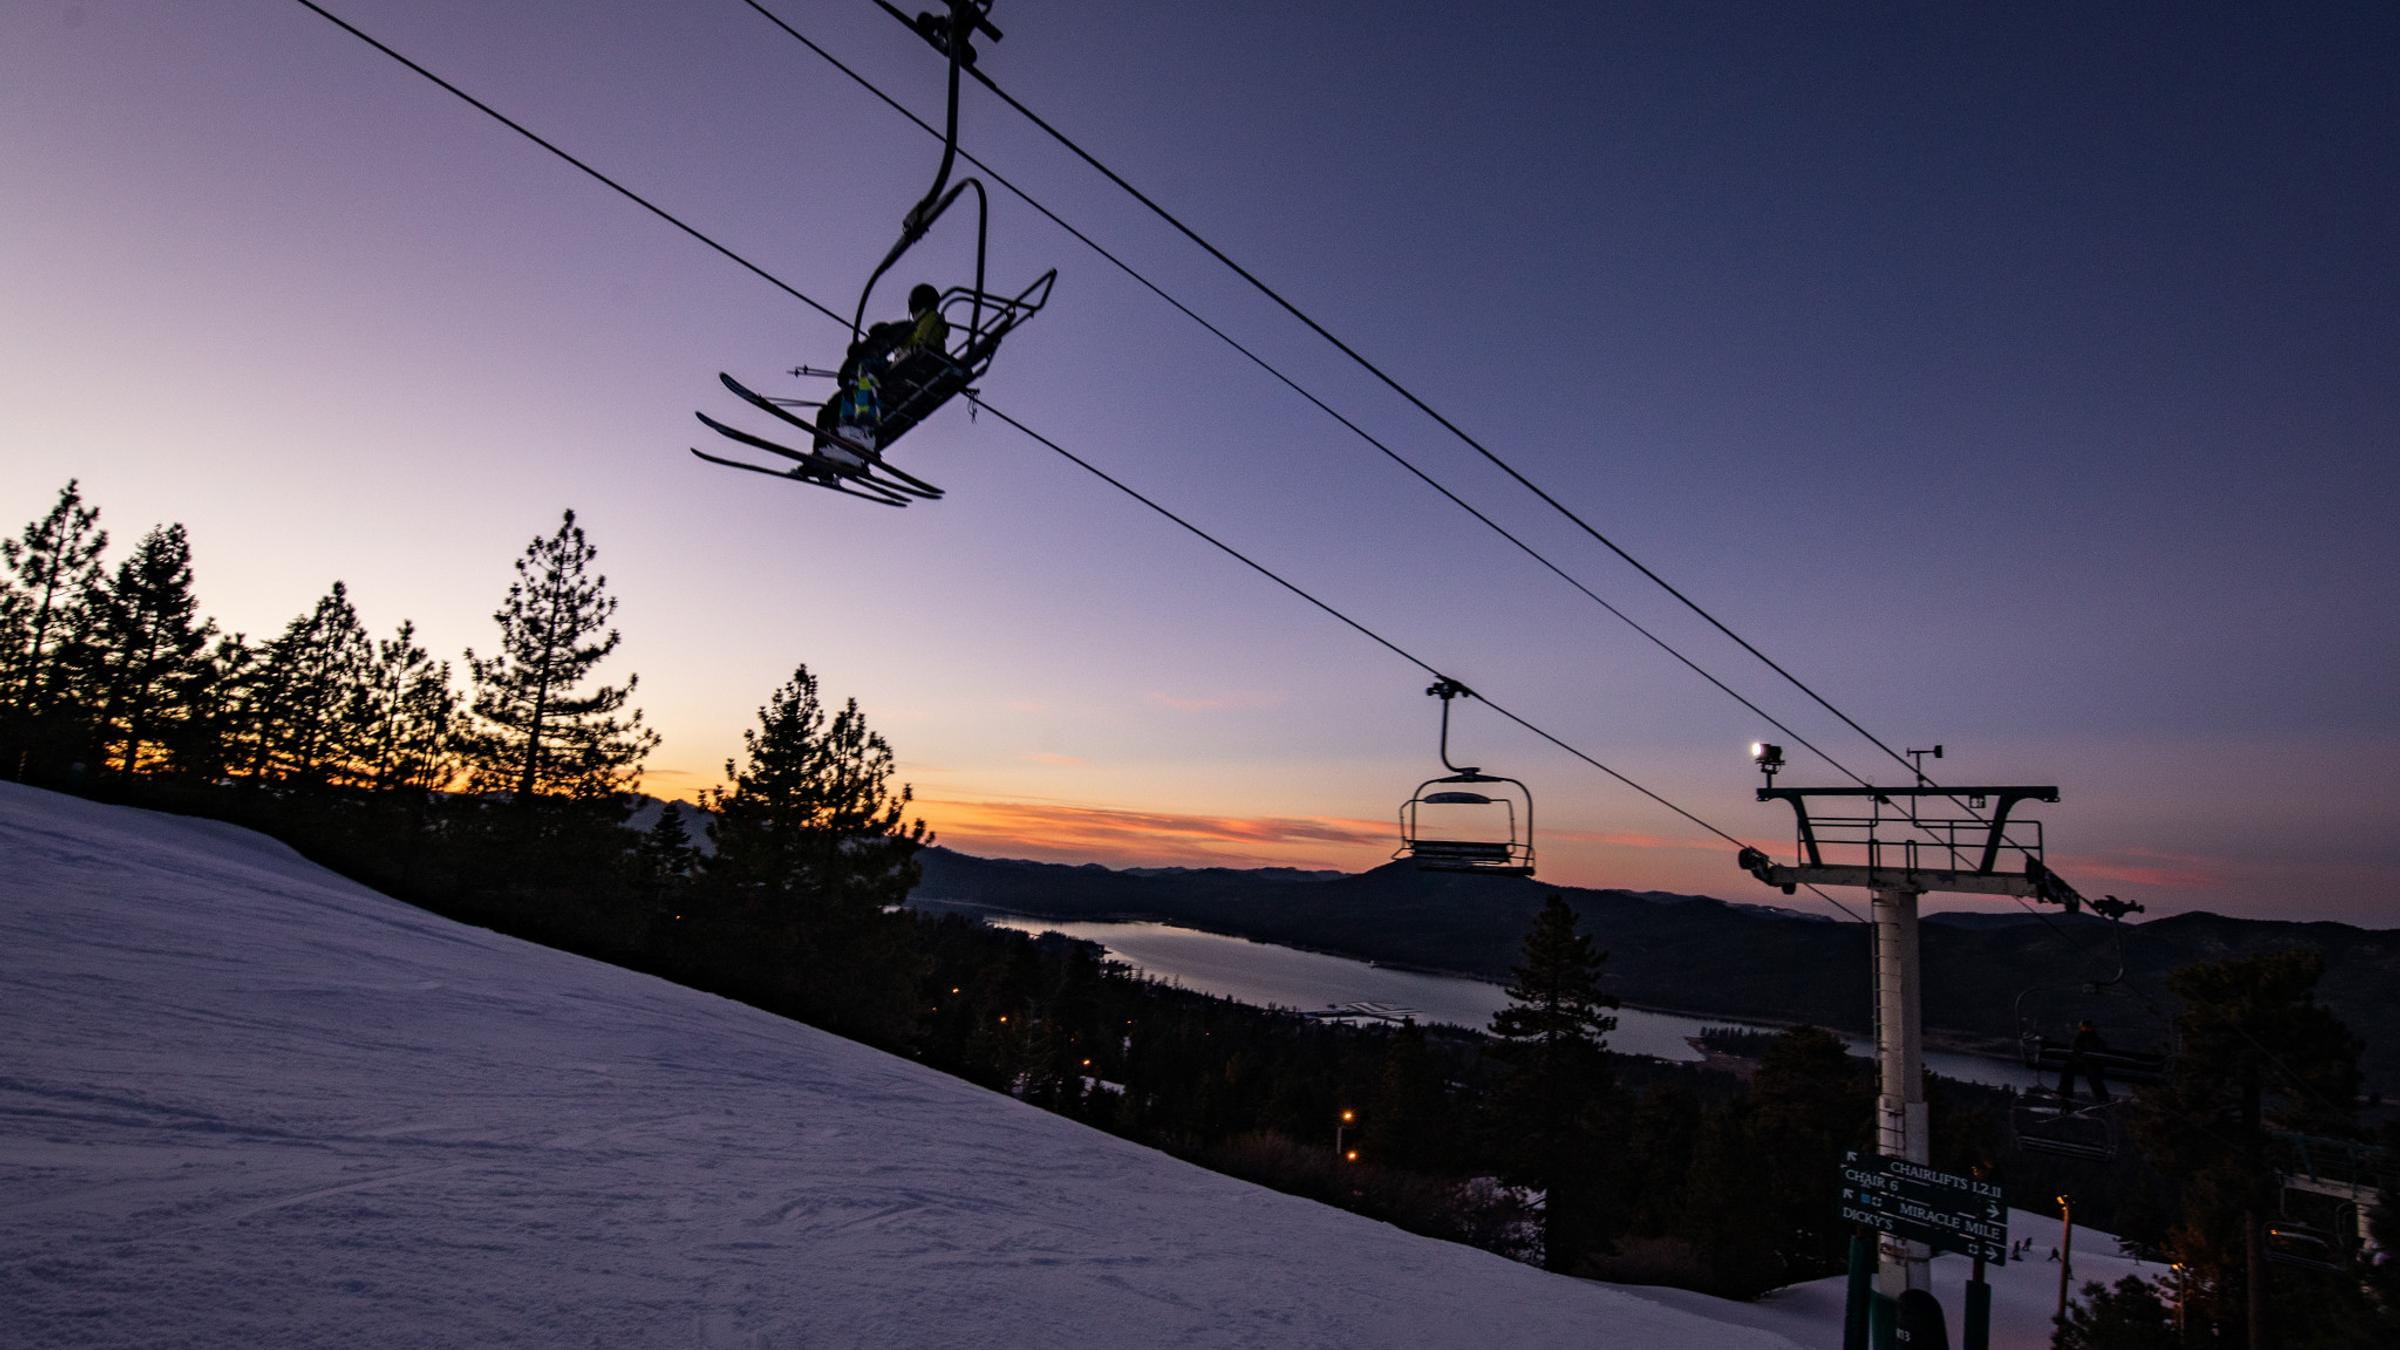 Two skiers on a chairlift during the evening.